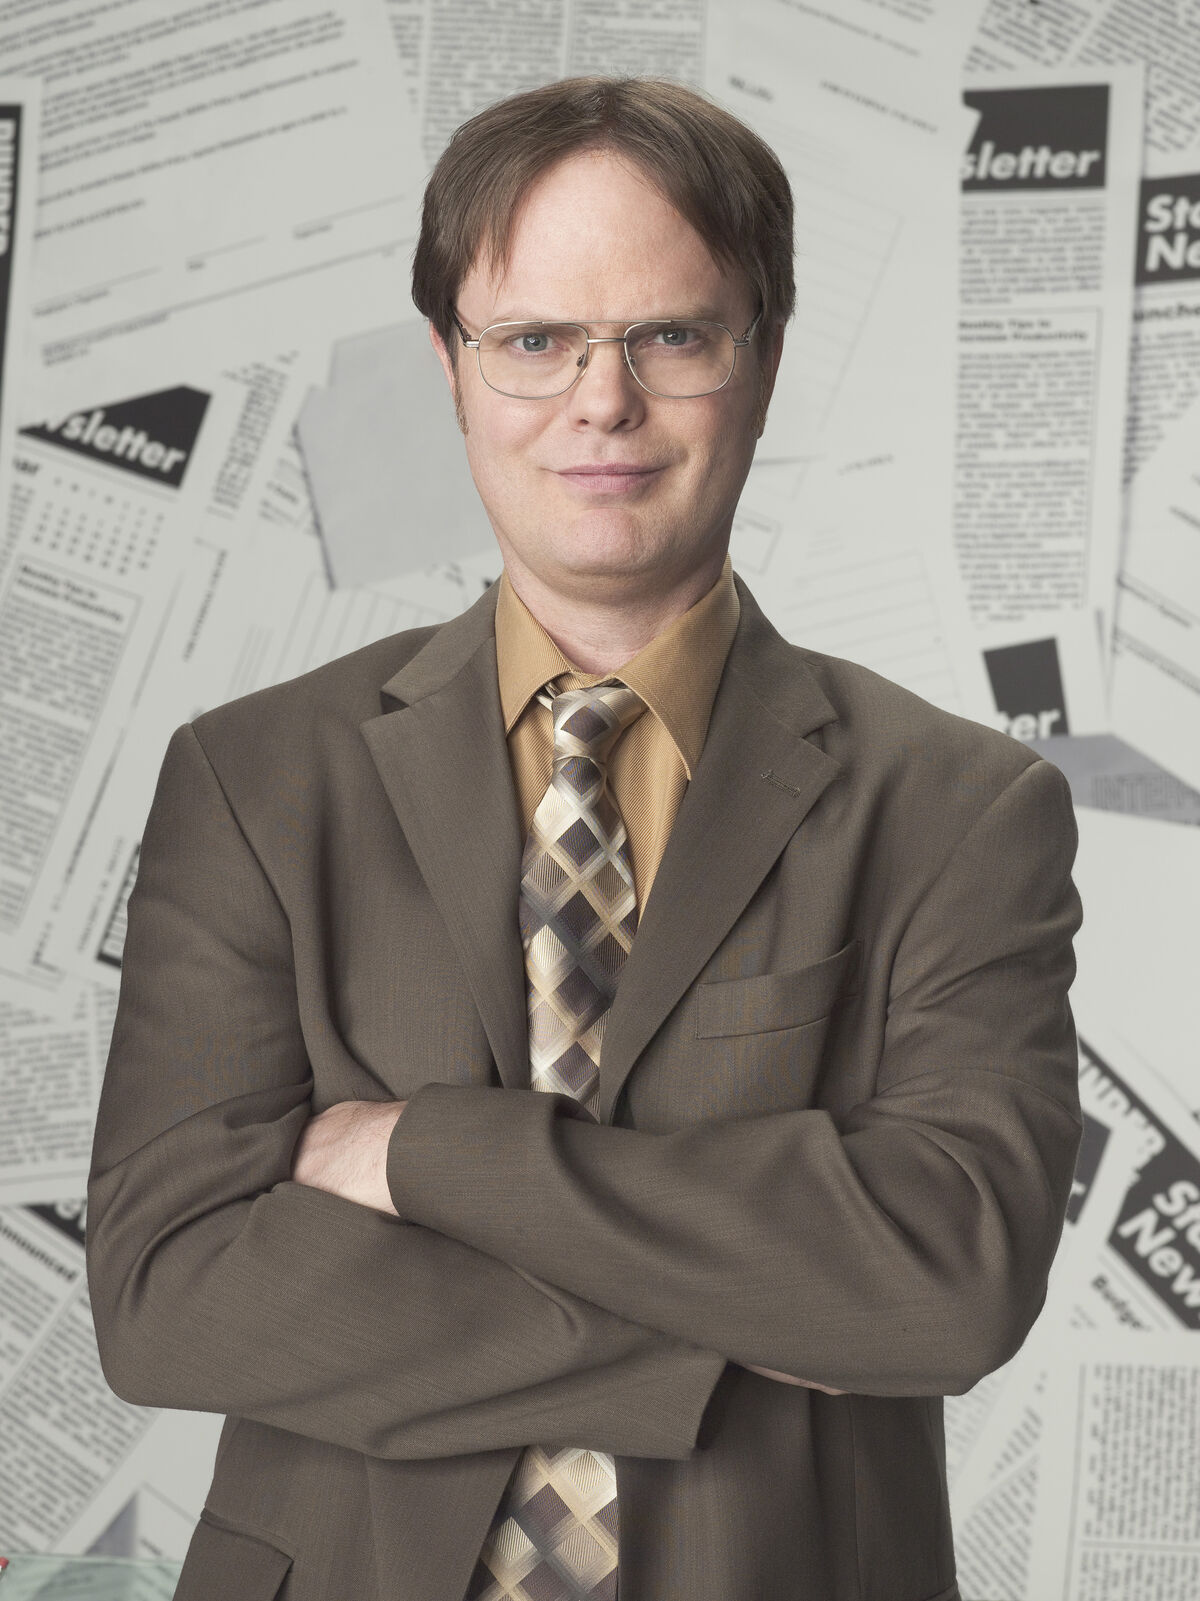 By the way, the hooked on you outfit for dwight seems to be seen